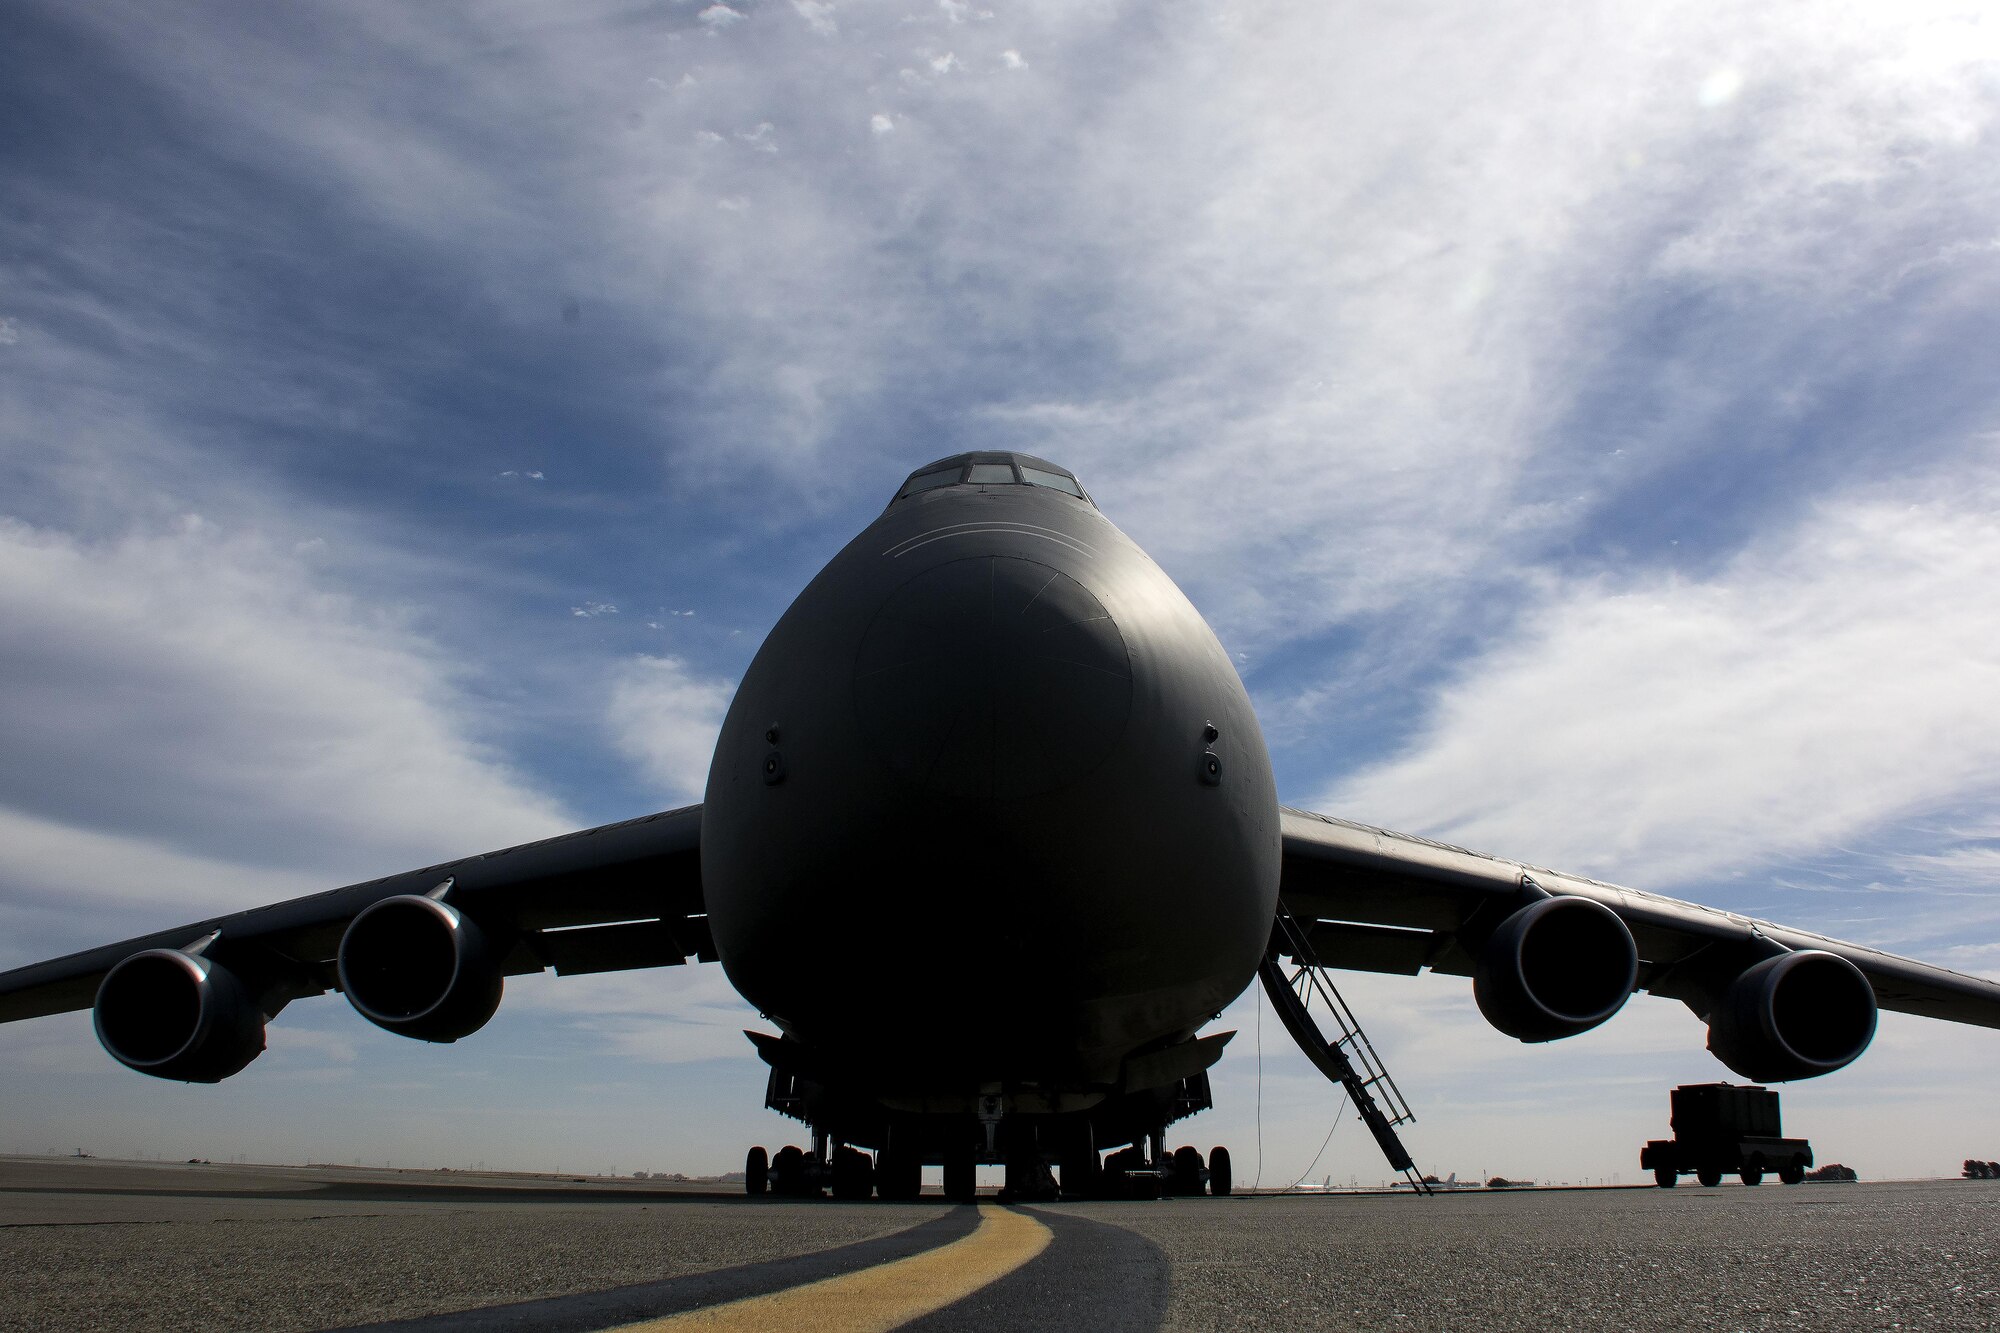 The first of two upgraded C-5C Super Galaxy aircraft was tested to verify if the aircraft still met the vibroacoustics requirements set forth by NASA Sept. 24, 2015, at Travis Air Force Base, Calif. Travis AFB is home to the Air Force’s only two aircraft specially modified to insert and transport NASA space containers into the aft end of the cargo compartment. With the recent completion of the Reliability Enhancement and Re-Engining Program upgrade, Air Force Space Command raised concerns regarding the vibratory environments of the cargo compartment, thus requesting the collection of the aircraft’s interior noise and vibration data to verify that the M-model SCM cargo compartment was still compliant with NASA requirements. (U.S. Air Force photo/Senior Airman Charles Rivezzo) 